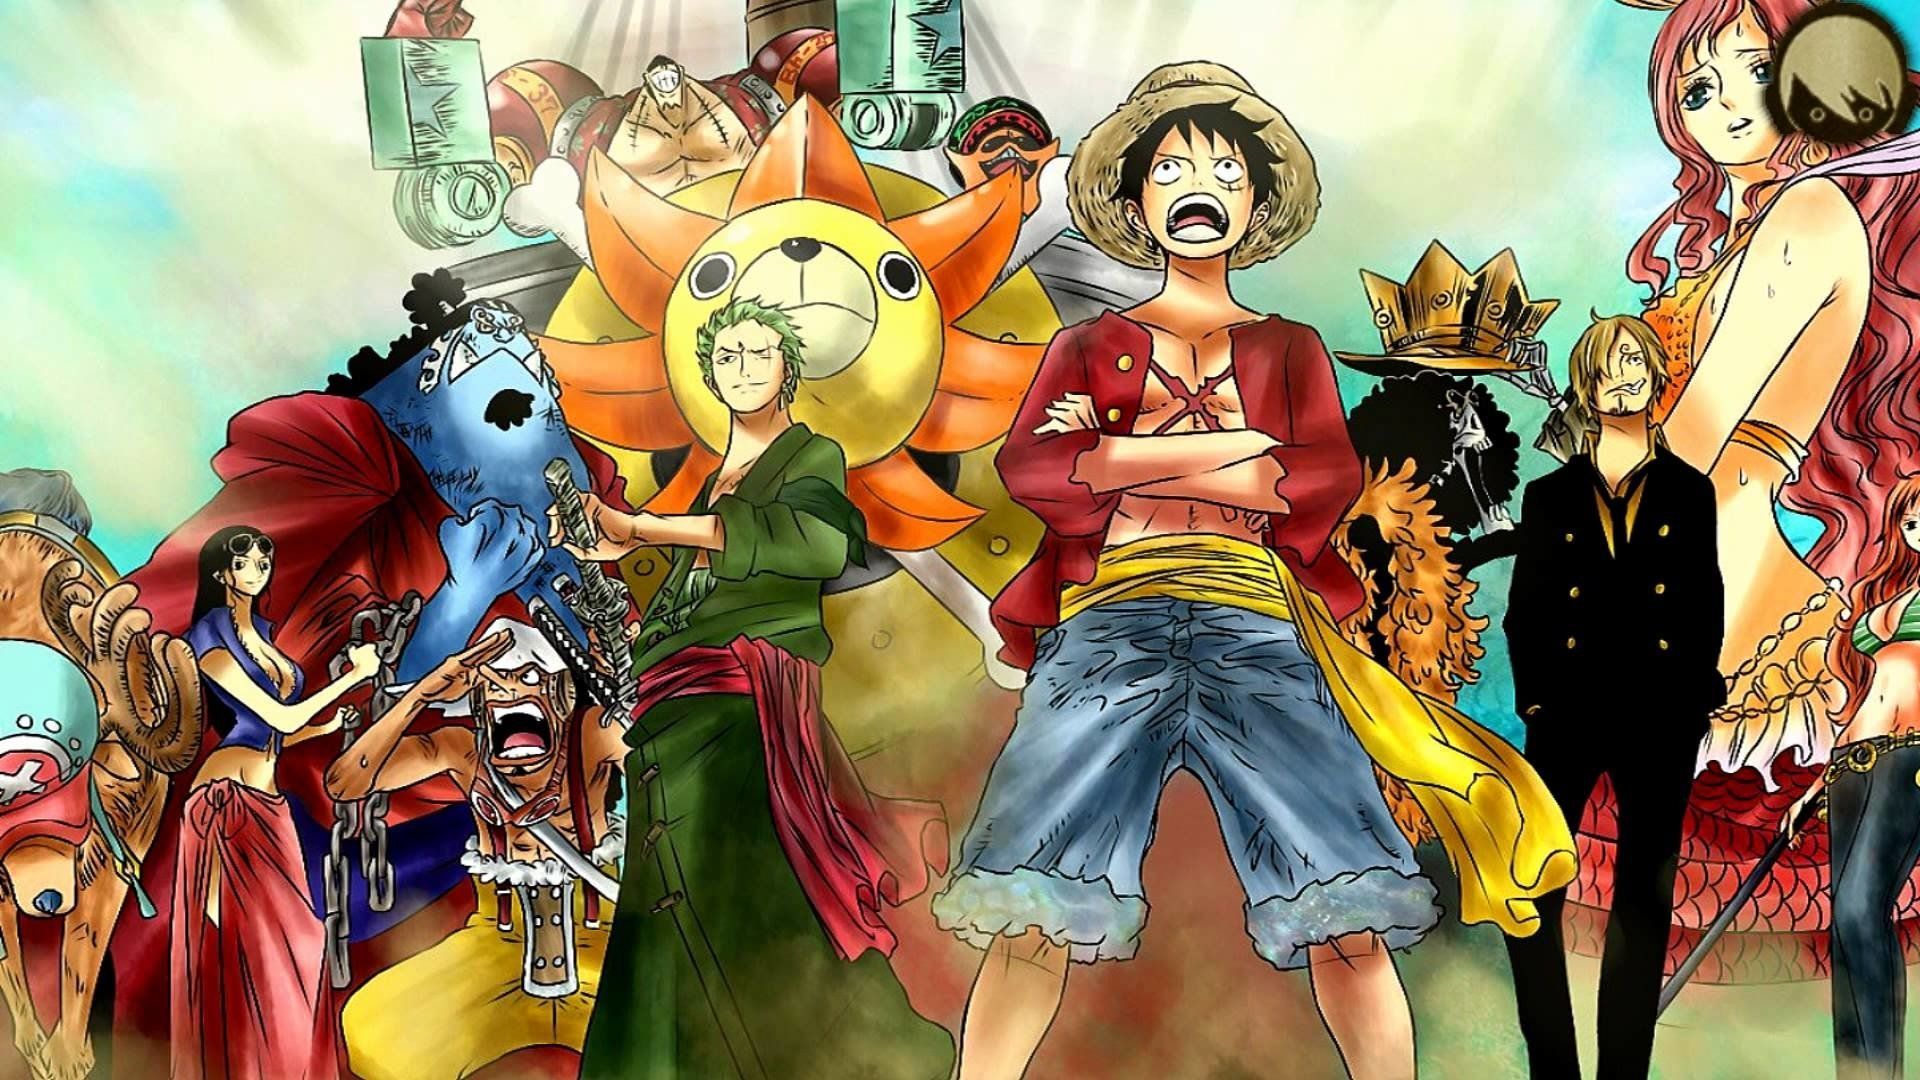 The straw hat crew Wallpaper Background Image. View, download, comment, and rate. Anime, Anime island, Brooks one piece